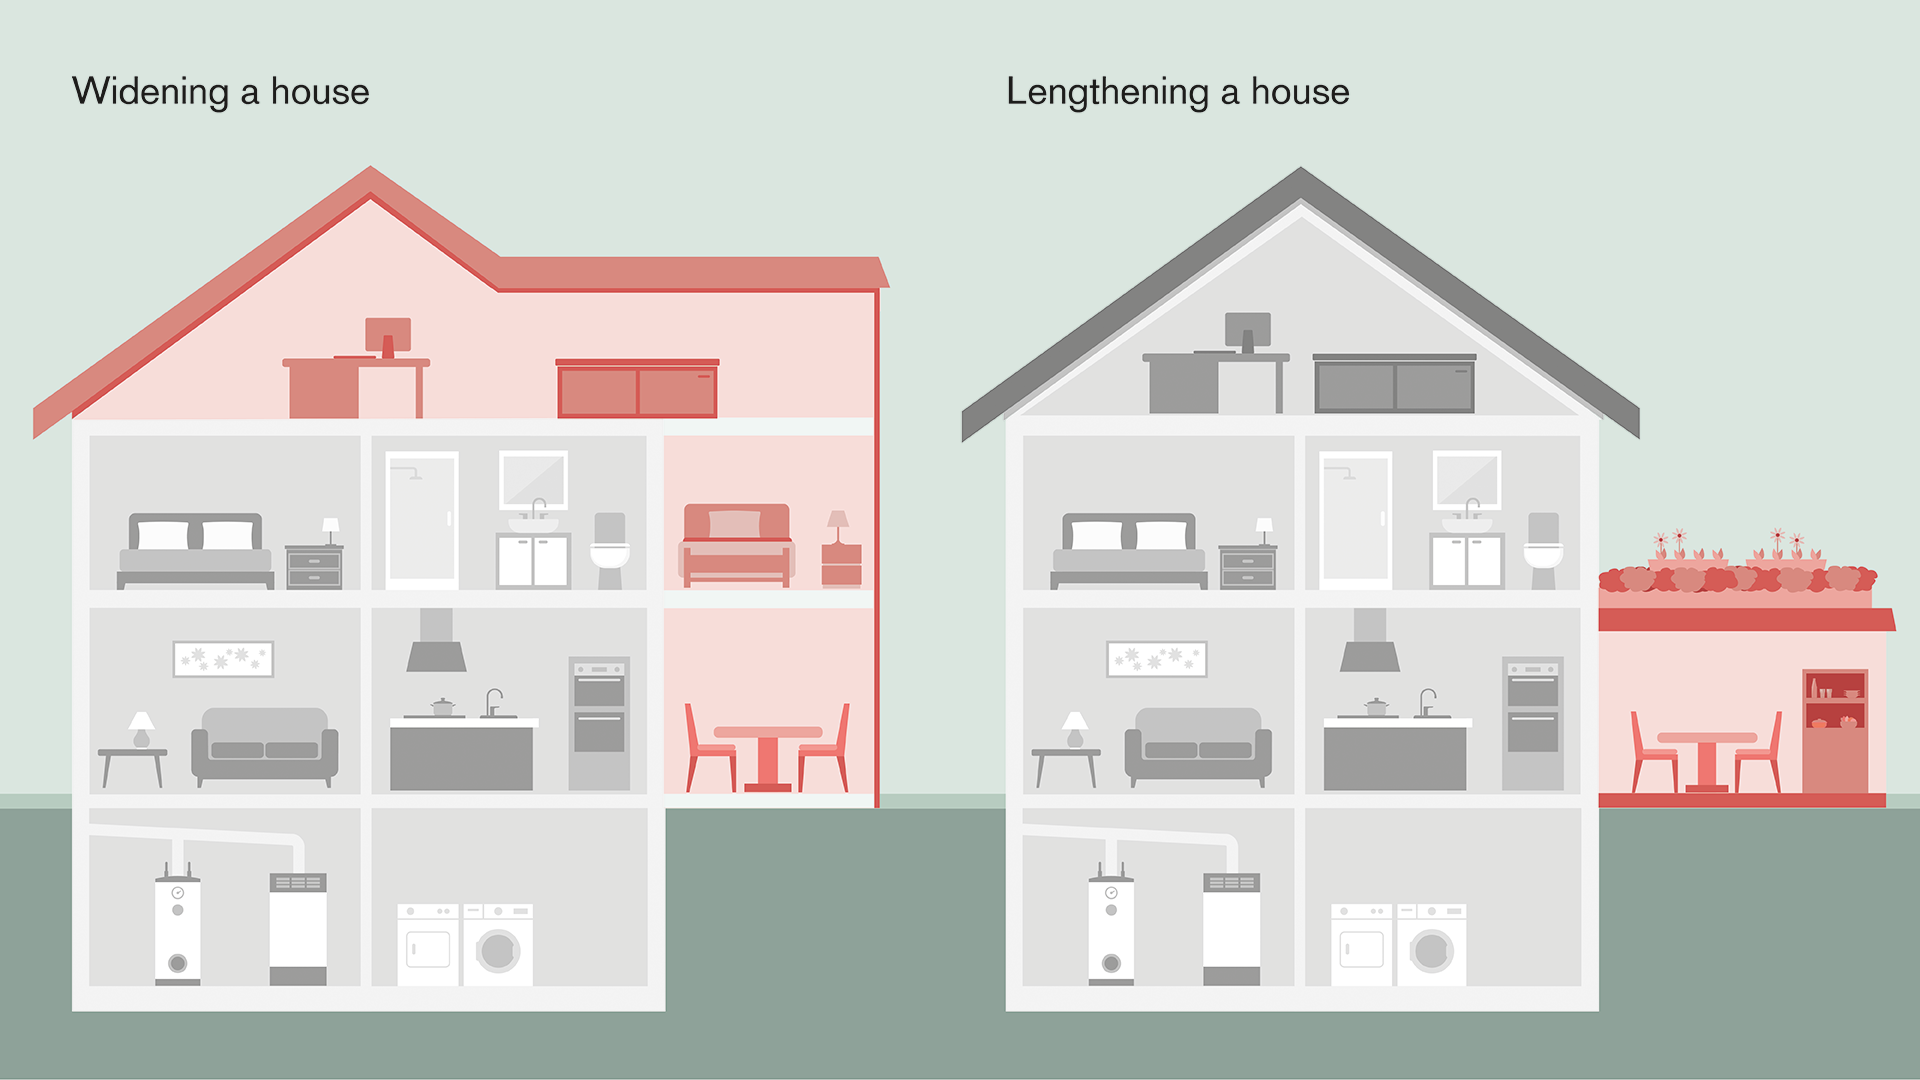 Expanding the living space: Widening or lengthening